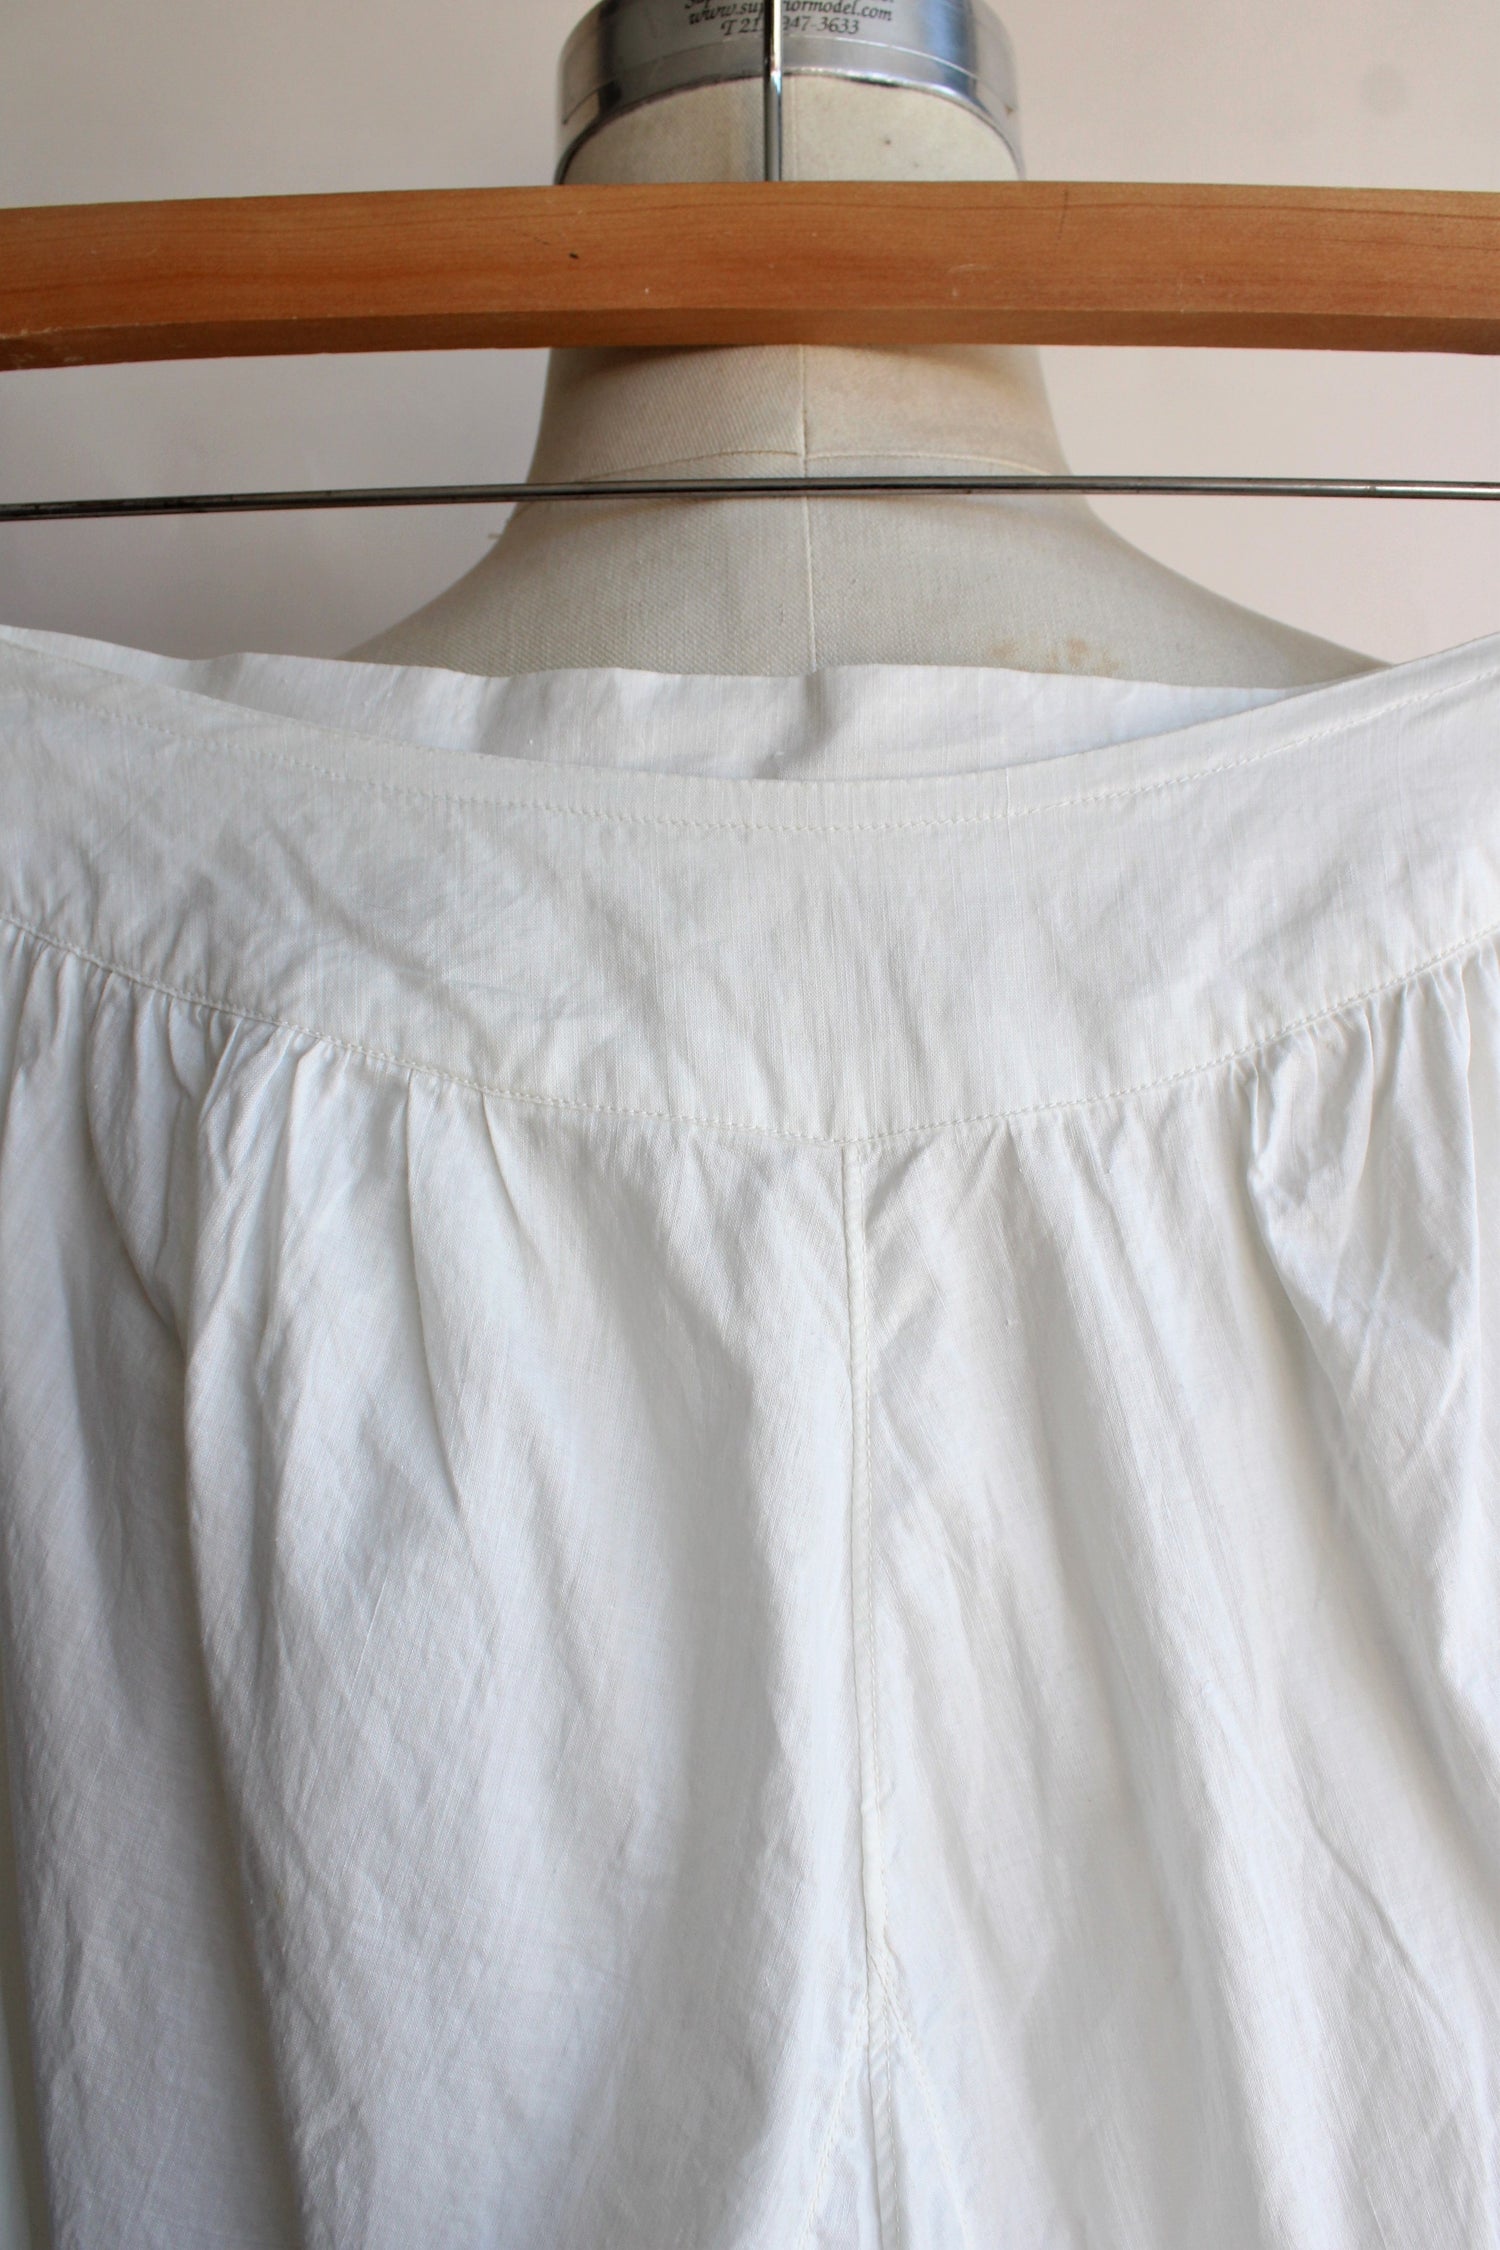 Antique Victorian White Cotton Bloomers